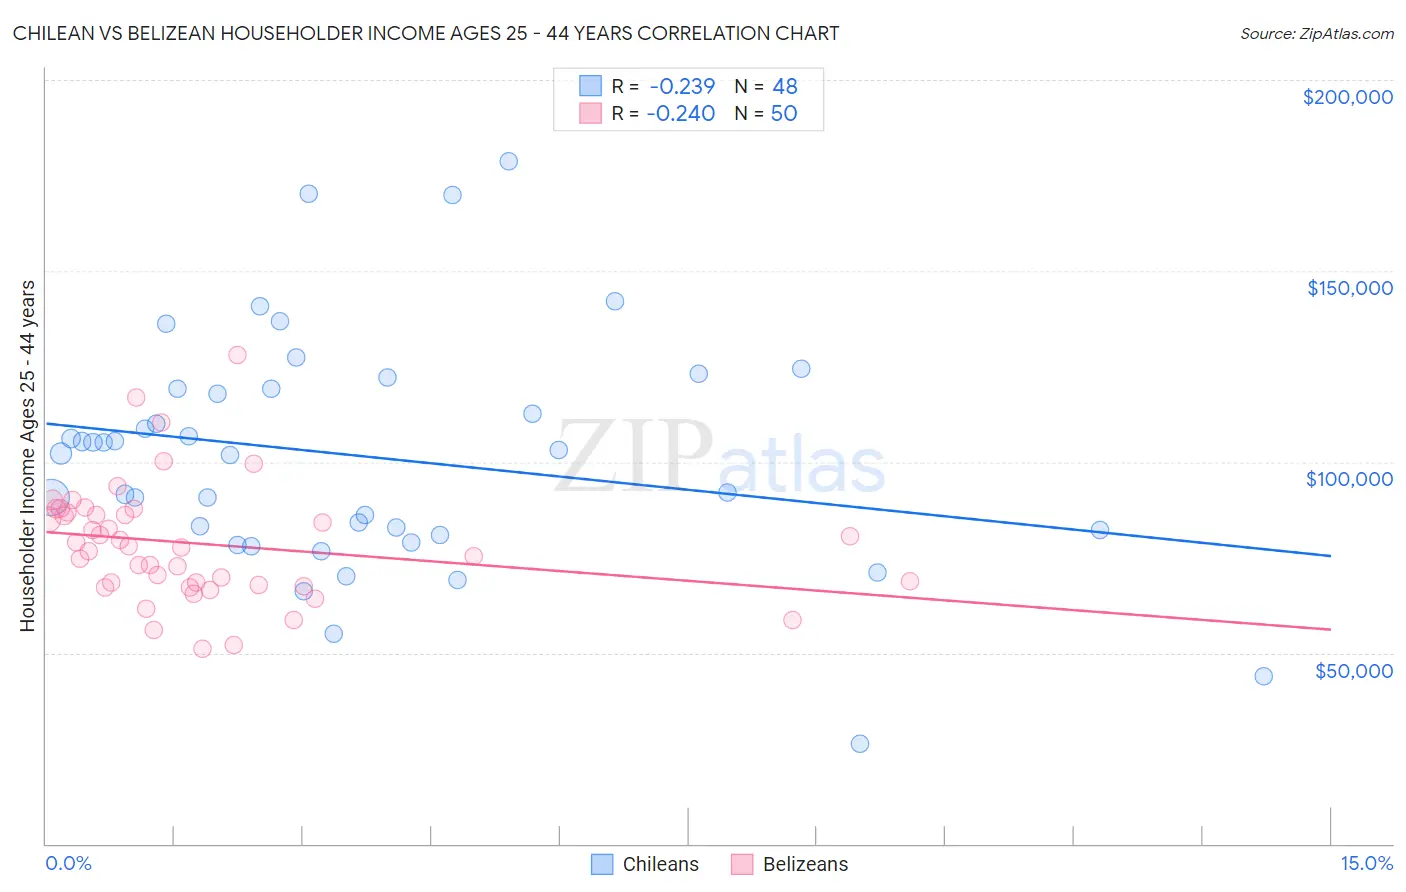 Chilean vs Belizean Householder Income Ages 25 - 44 years